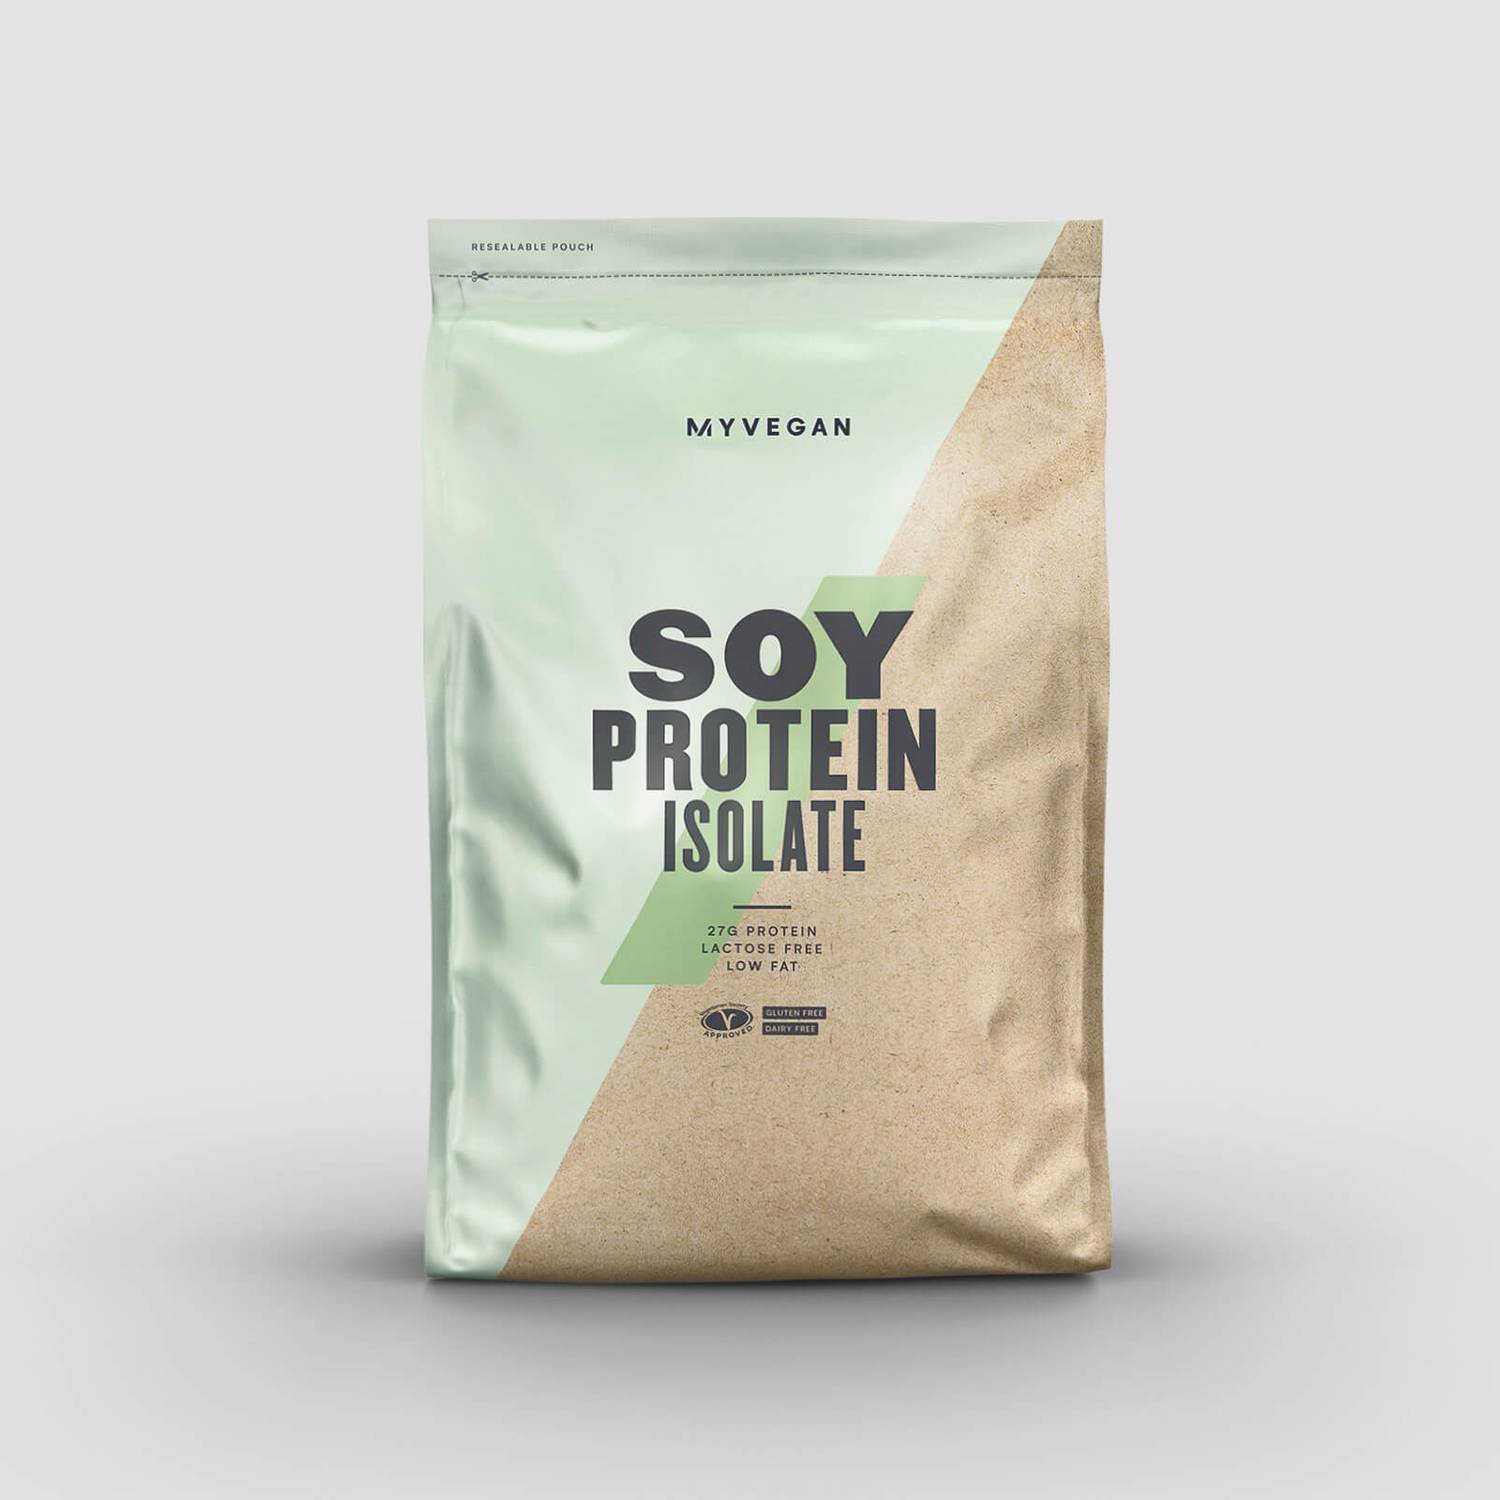 Myprotein 2.2lb Soy Protein Isolate Unflavored for $15 with Free Shipping